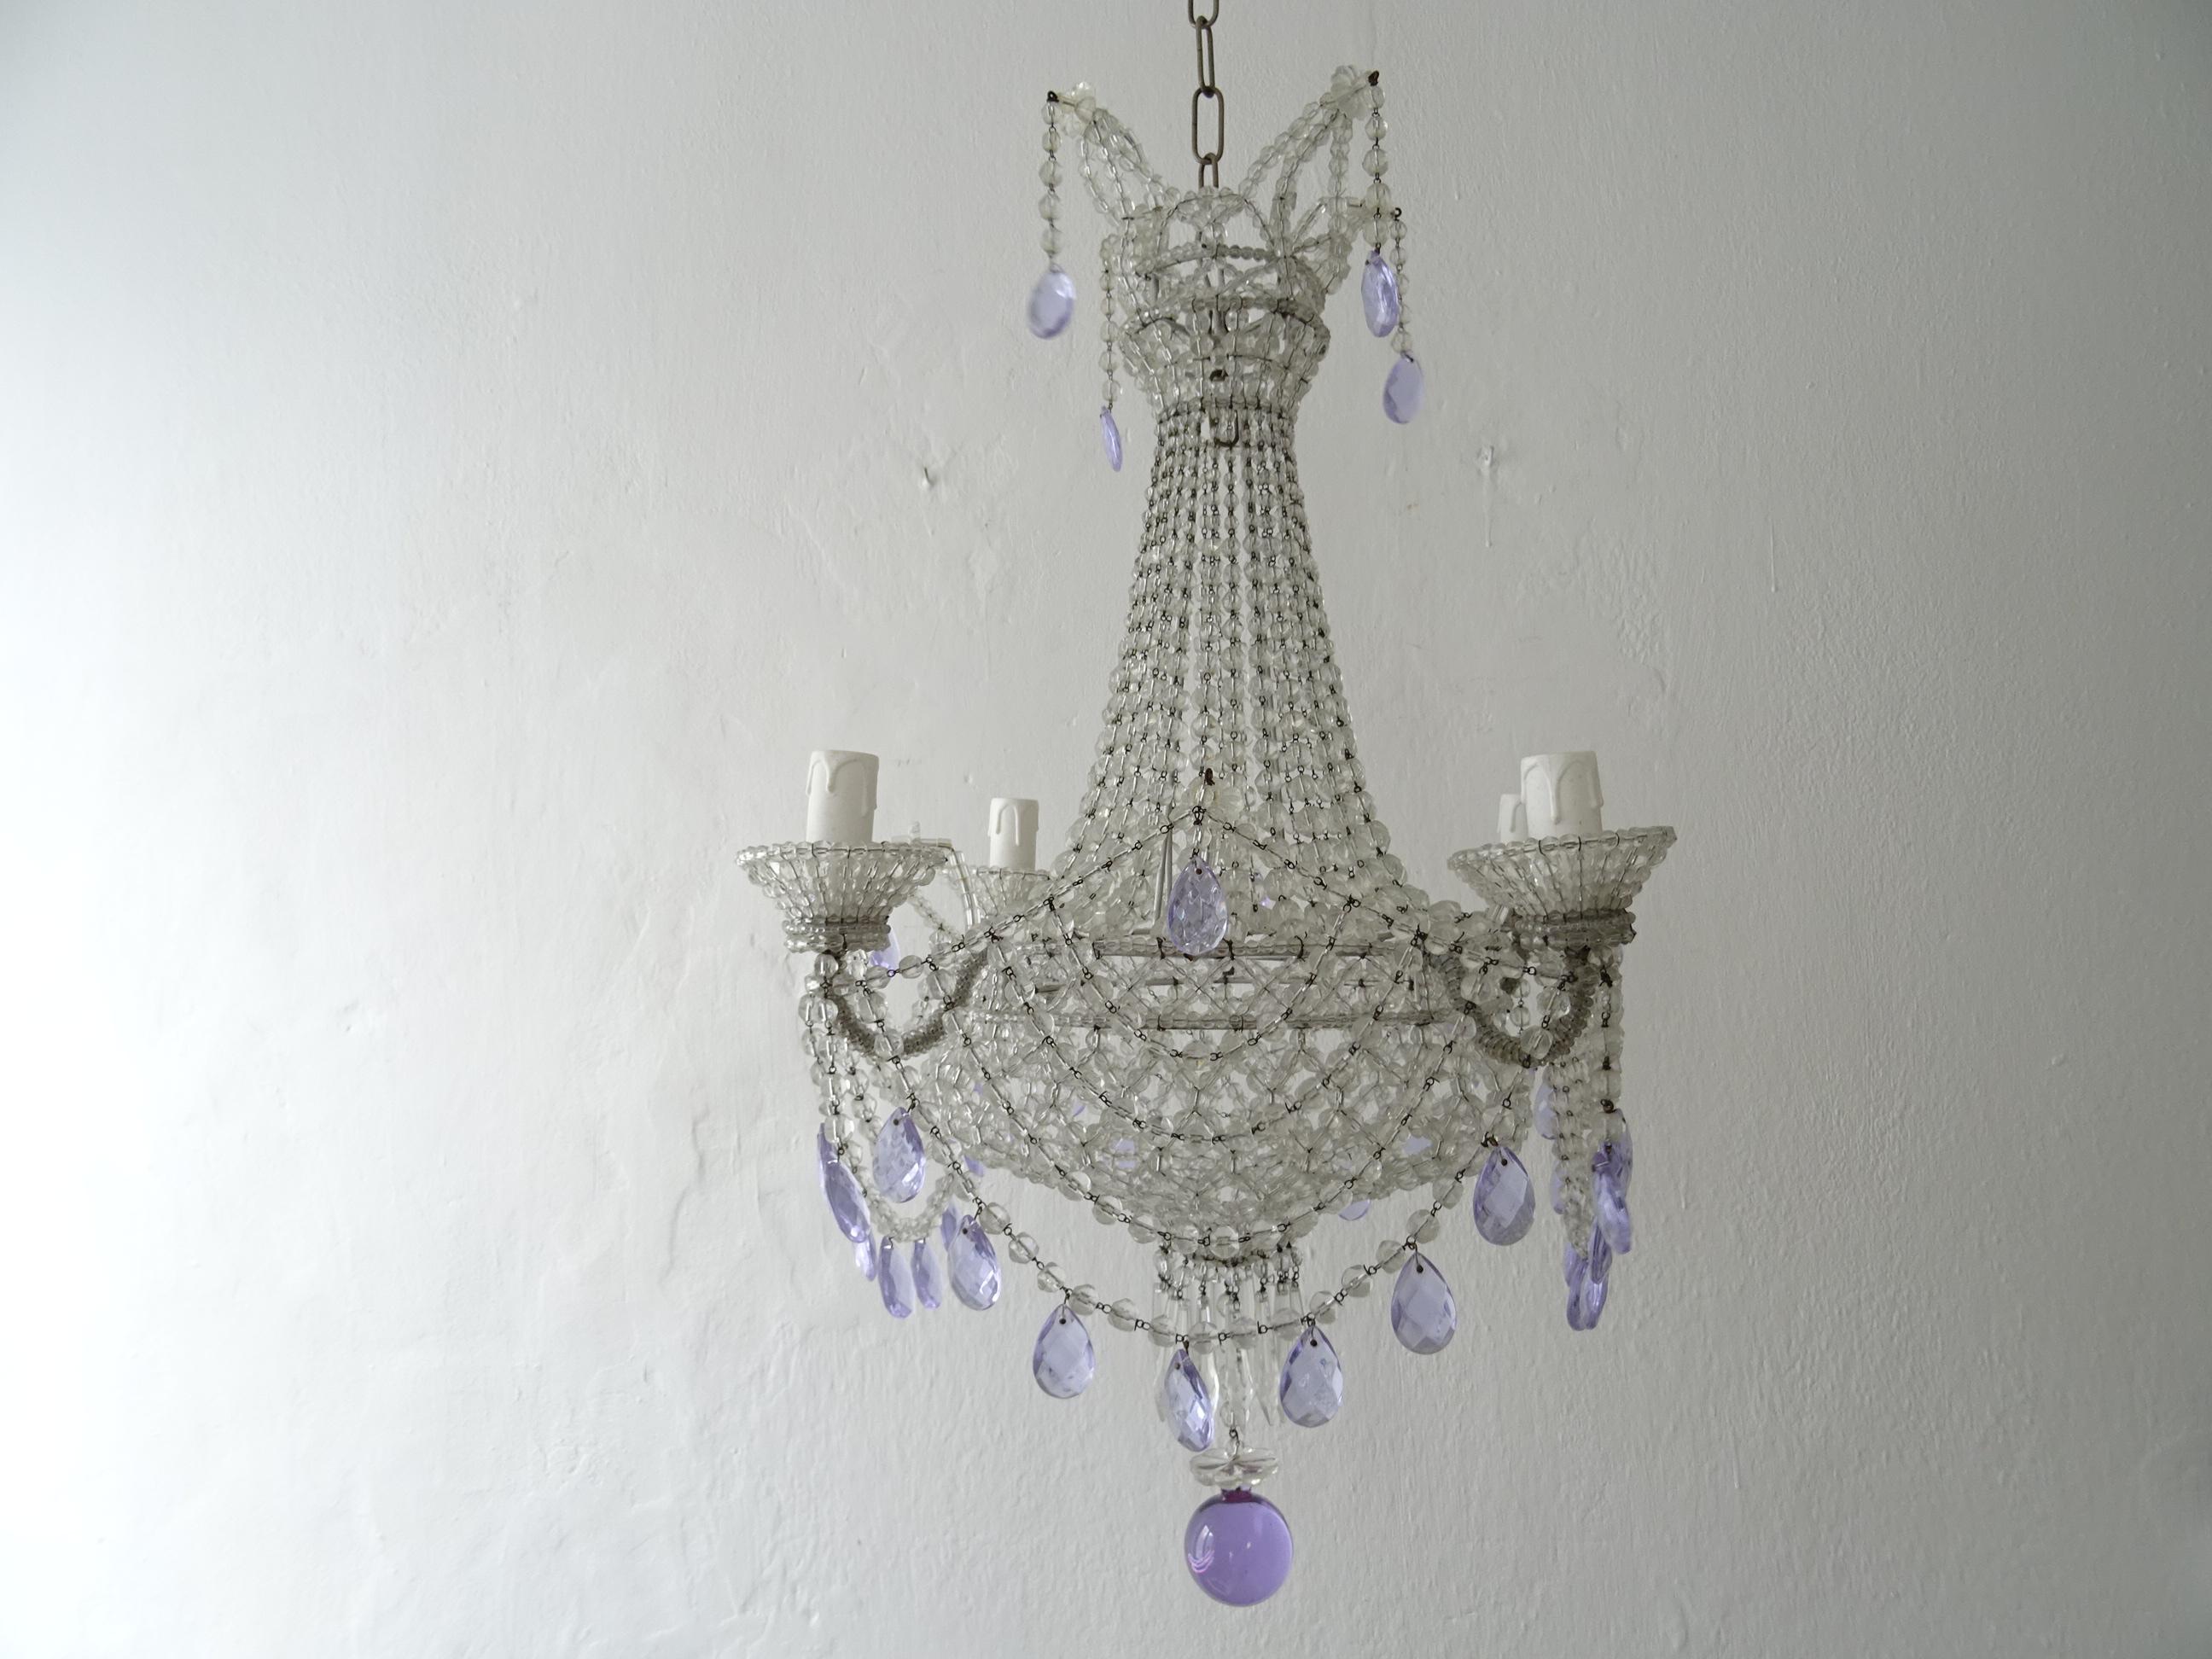 Housing 4 lights in beaded cups. Completely beaded with a beaded lace bottom. Adorning rare lavender purple crystal prisms throughout and huge smooth lavender matching ball as finial. Adding another 16 inches of original chain and canopy. Will be